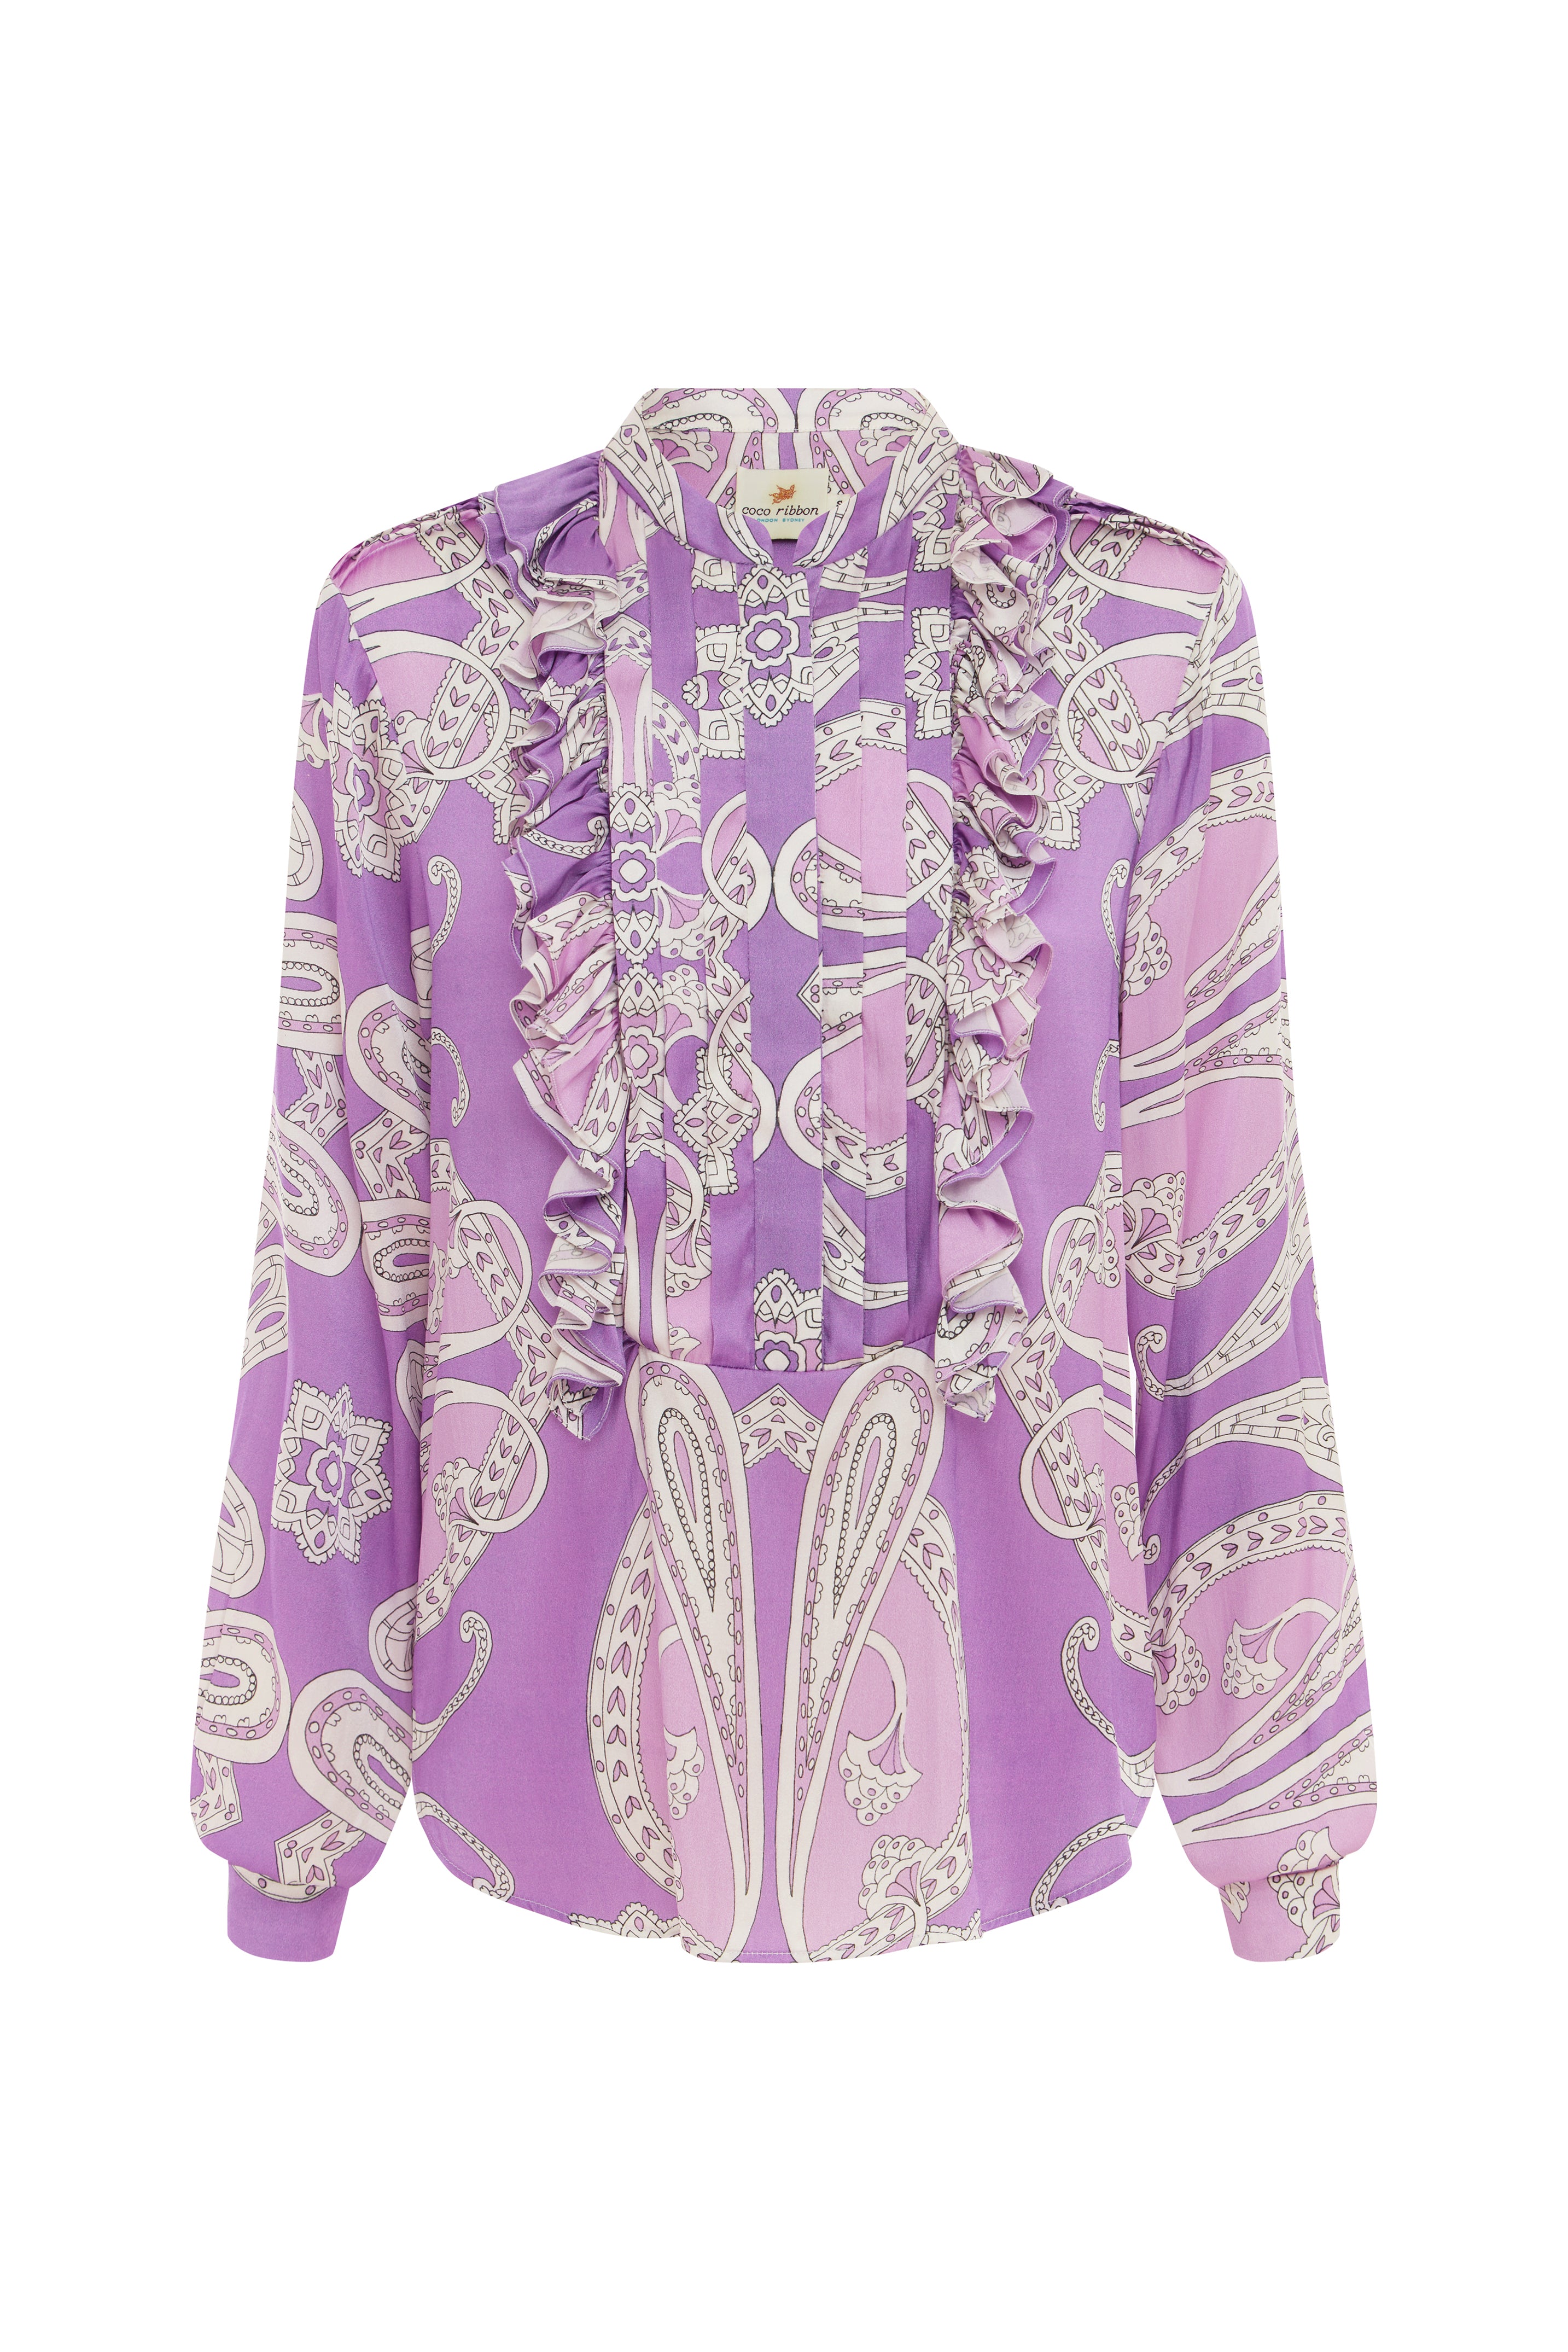 Bellagio Blouse in Lavender Paisley